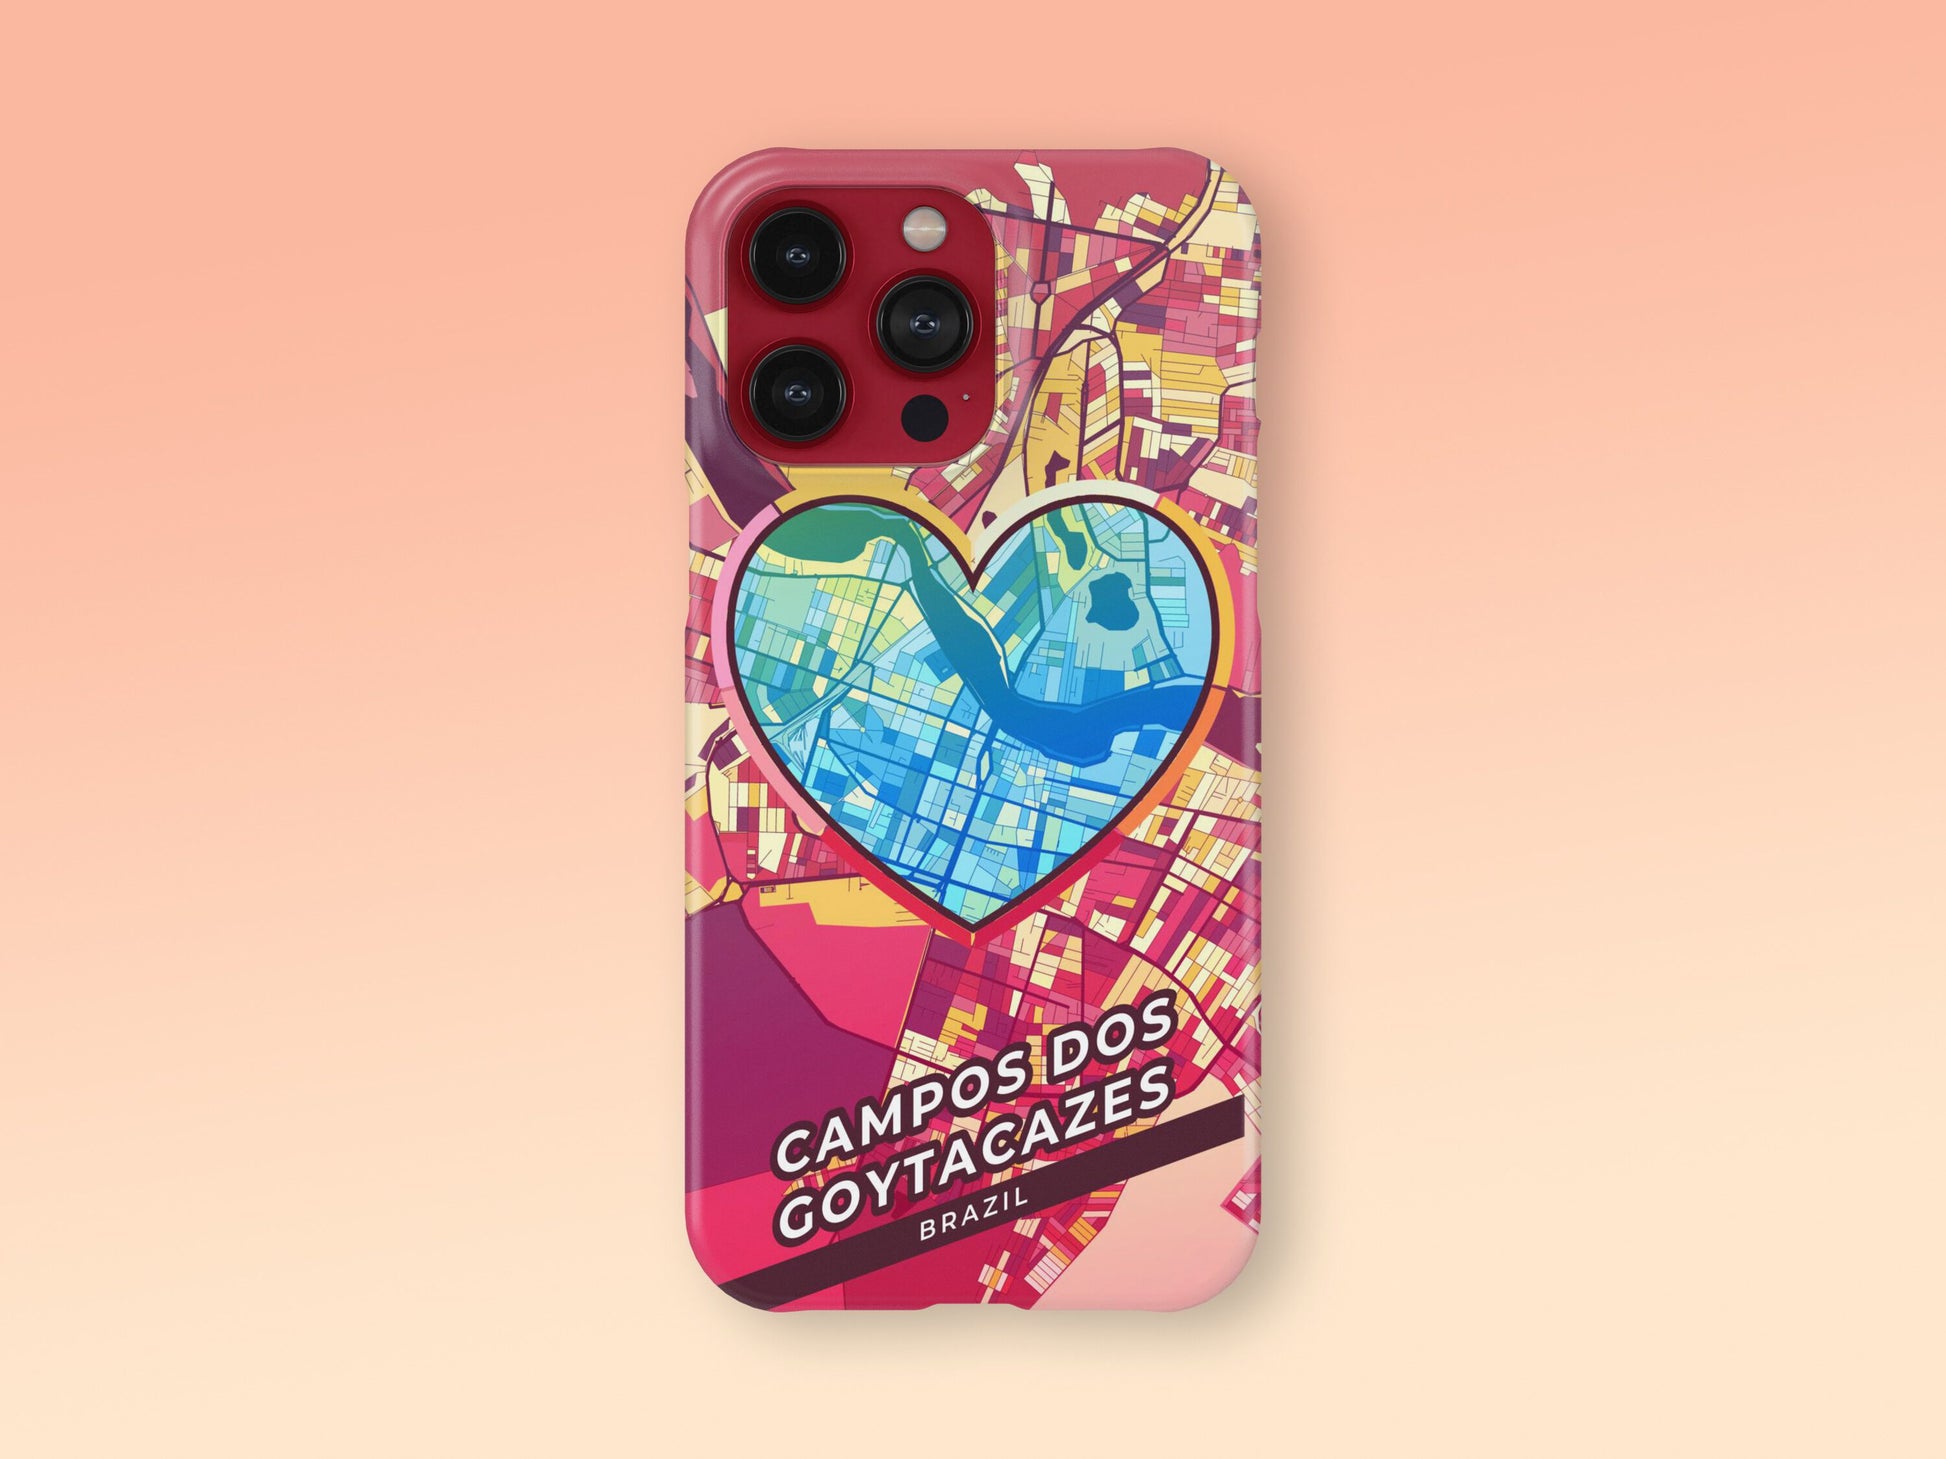 Campos Dos Goytacazes Brazil slim phone case with colorful icon. Birthday, wedding or housewarming gift. Couple match cases. 2